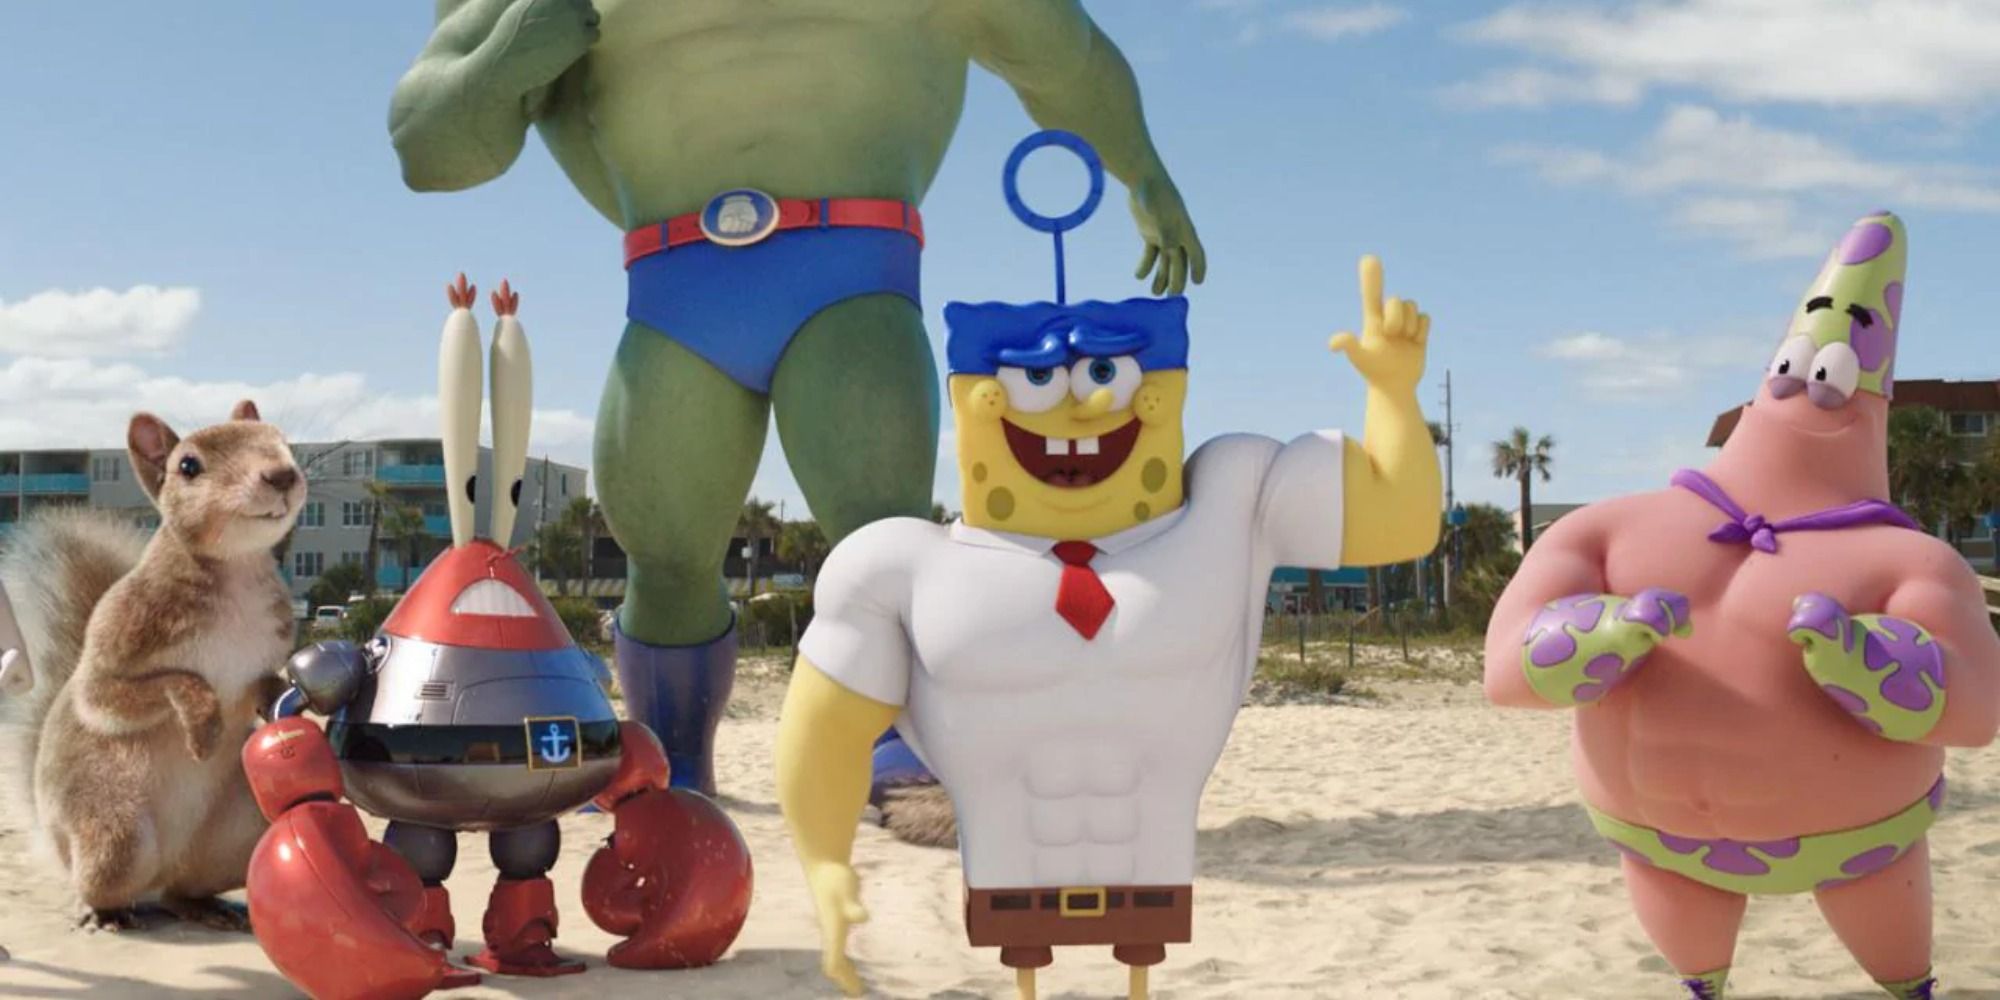 CGI versions of main characters walking on a beach in The SpongeBob Movie: Sponge Out Of Water